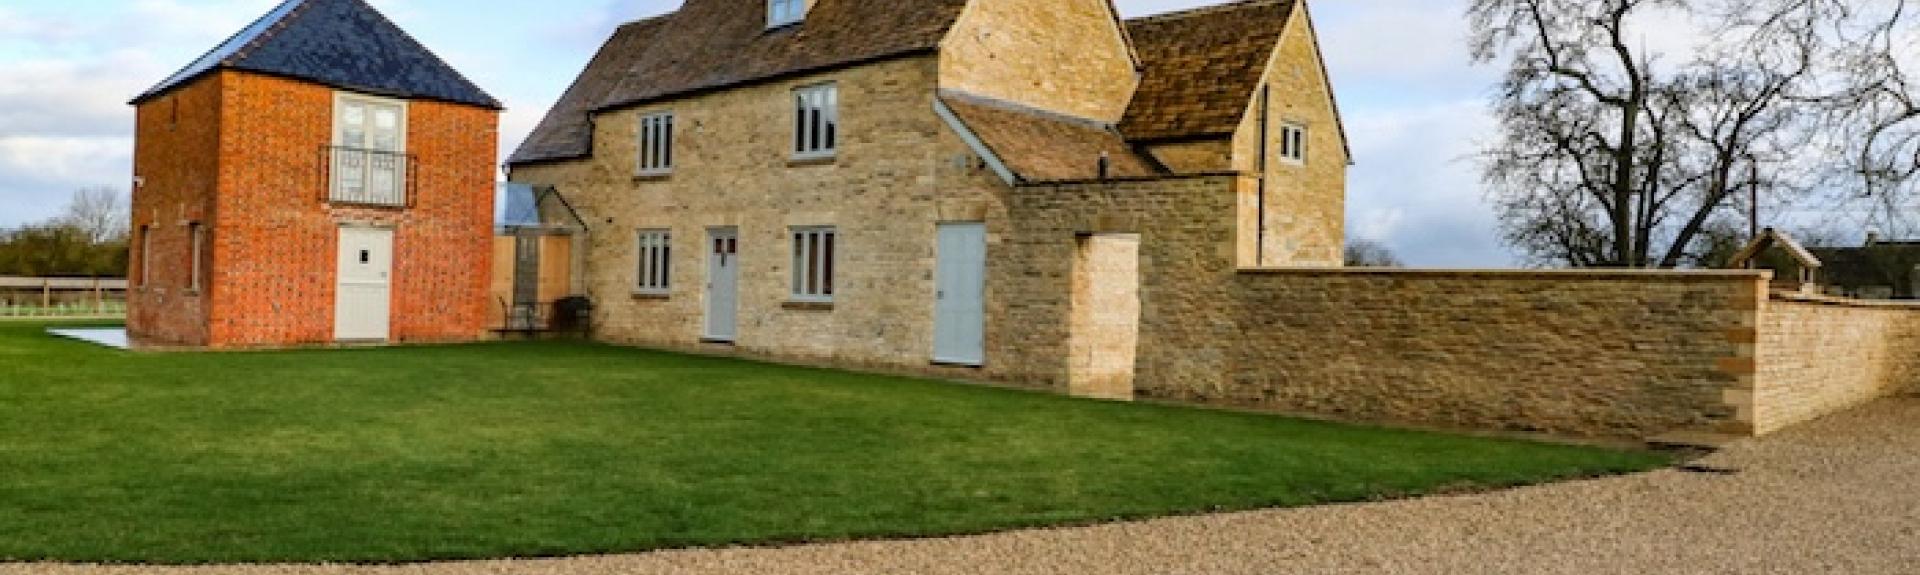 C Cotswold Farmhouse with a large outbuilding and walled garden.